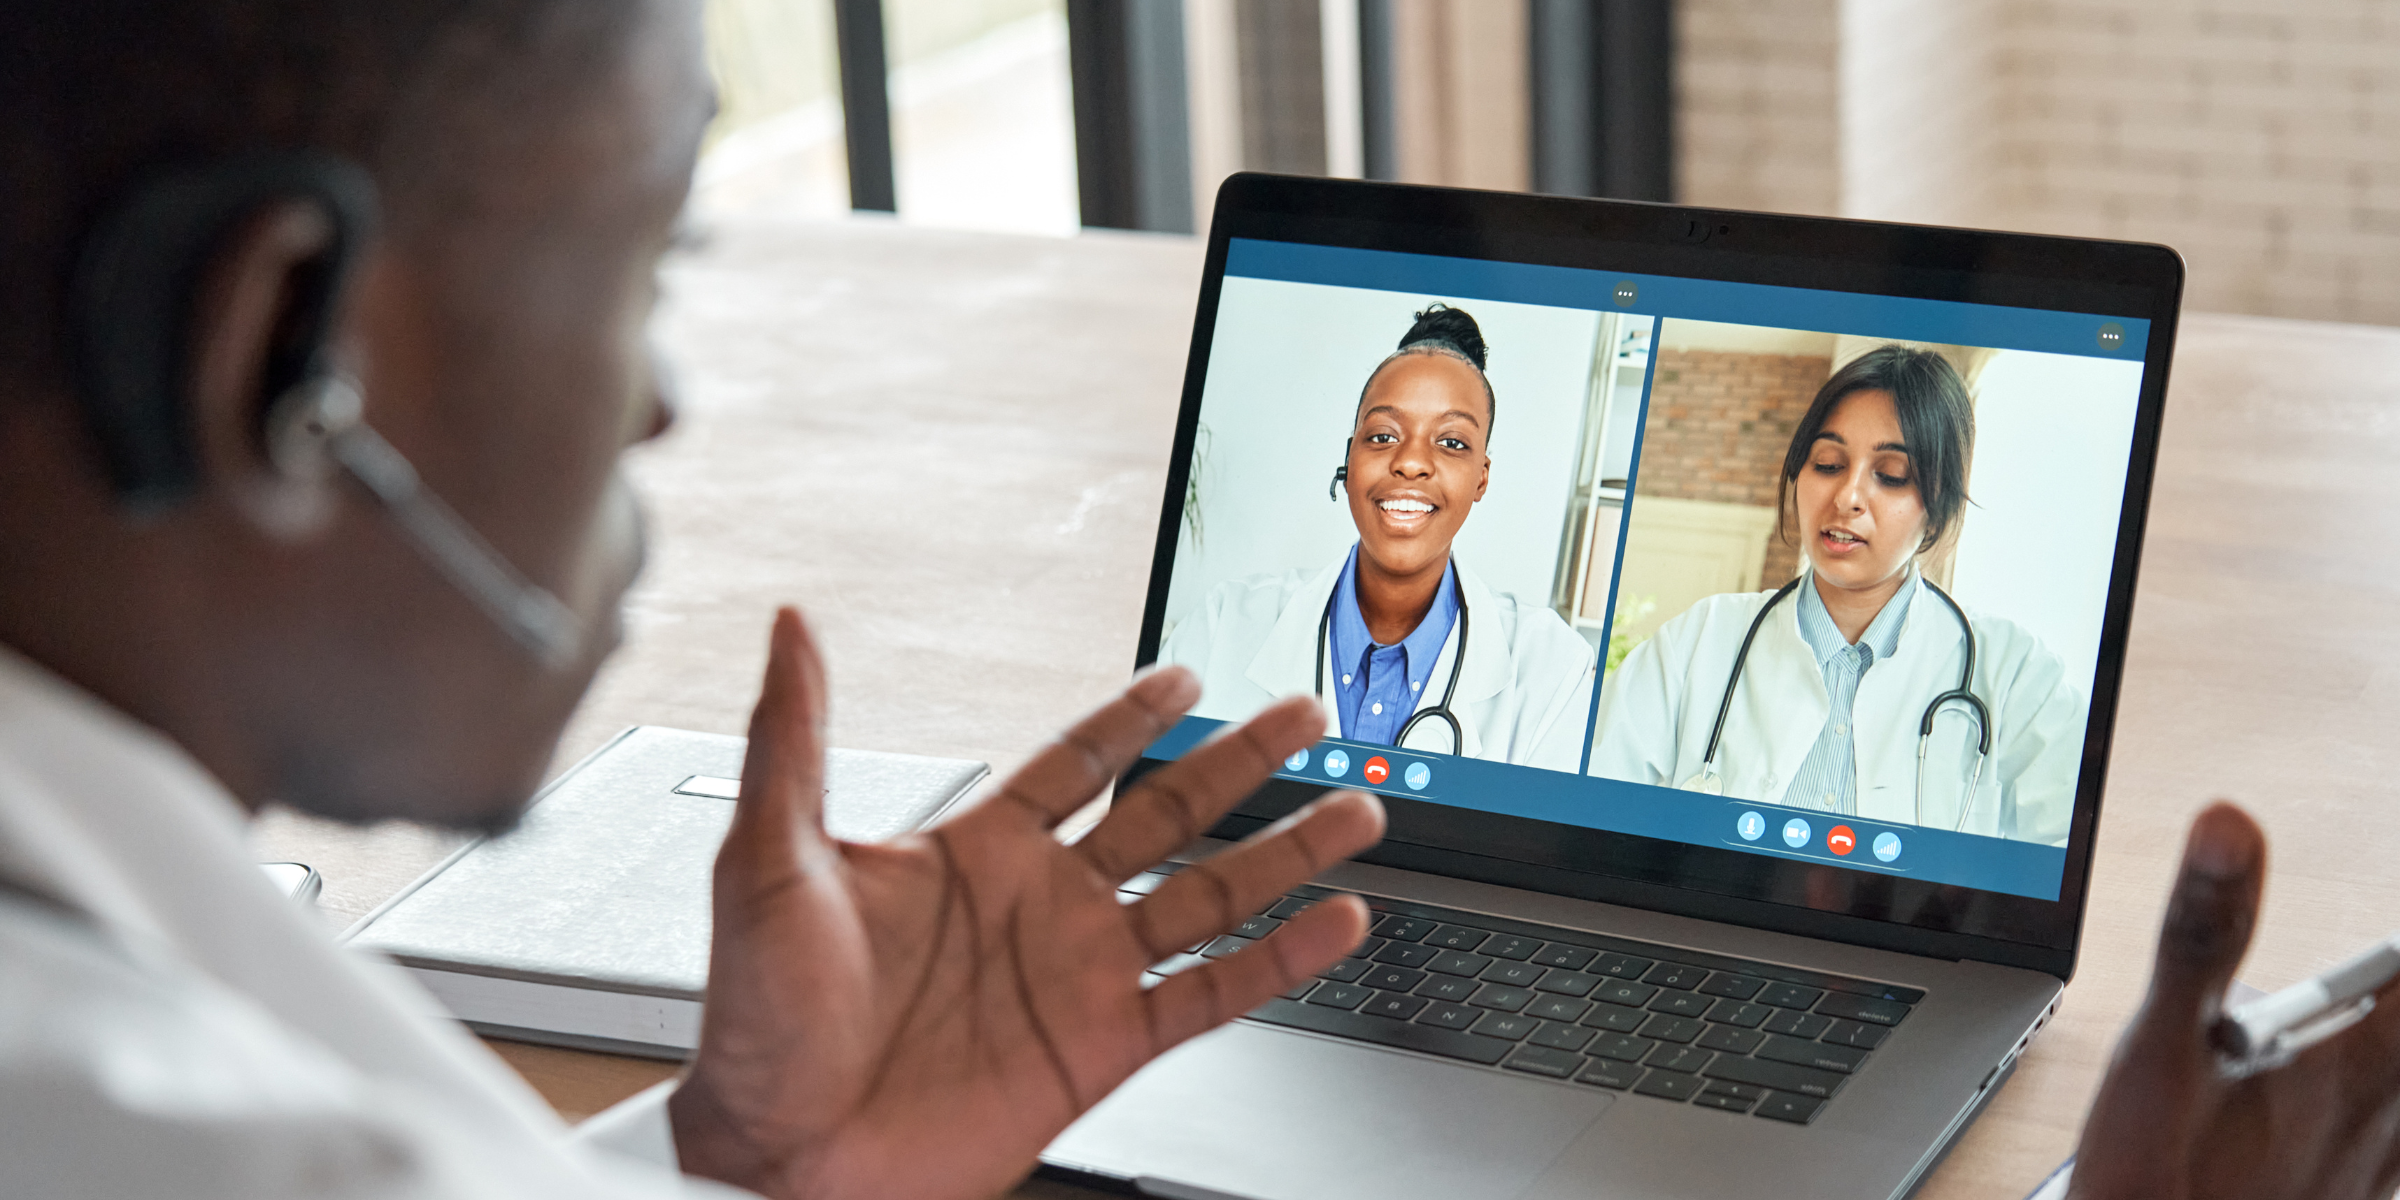 Main header image for the blog post "Is Zoom HIPAA Compliant?" depicting a secure telemedicine consultation.